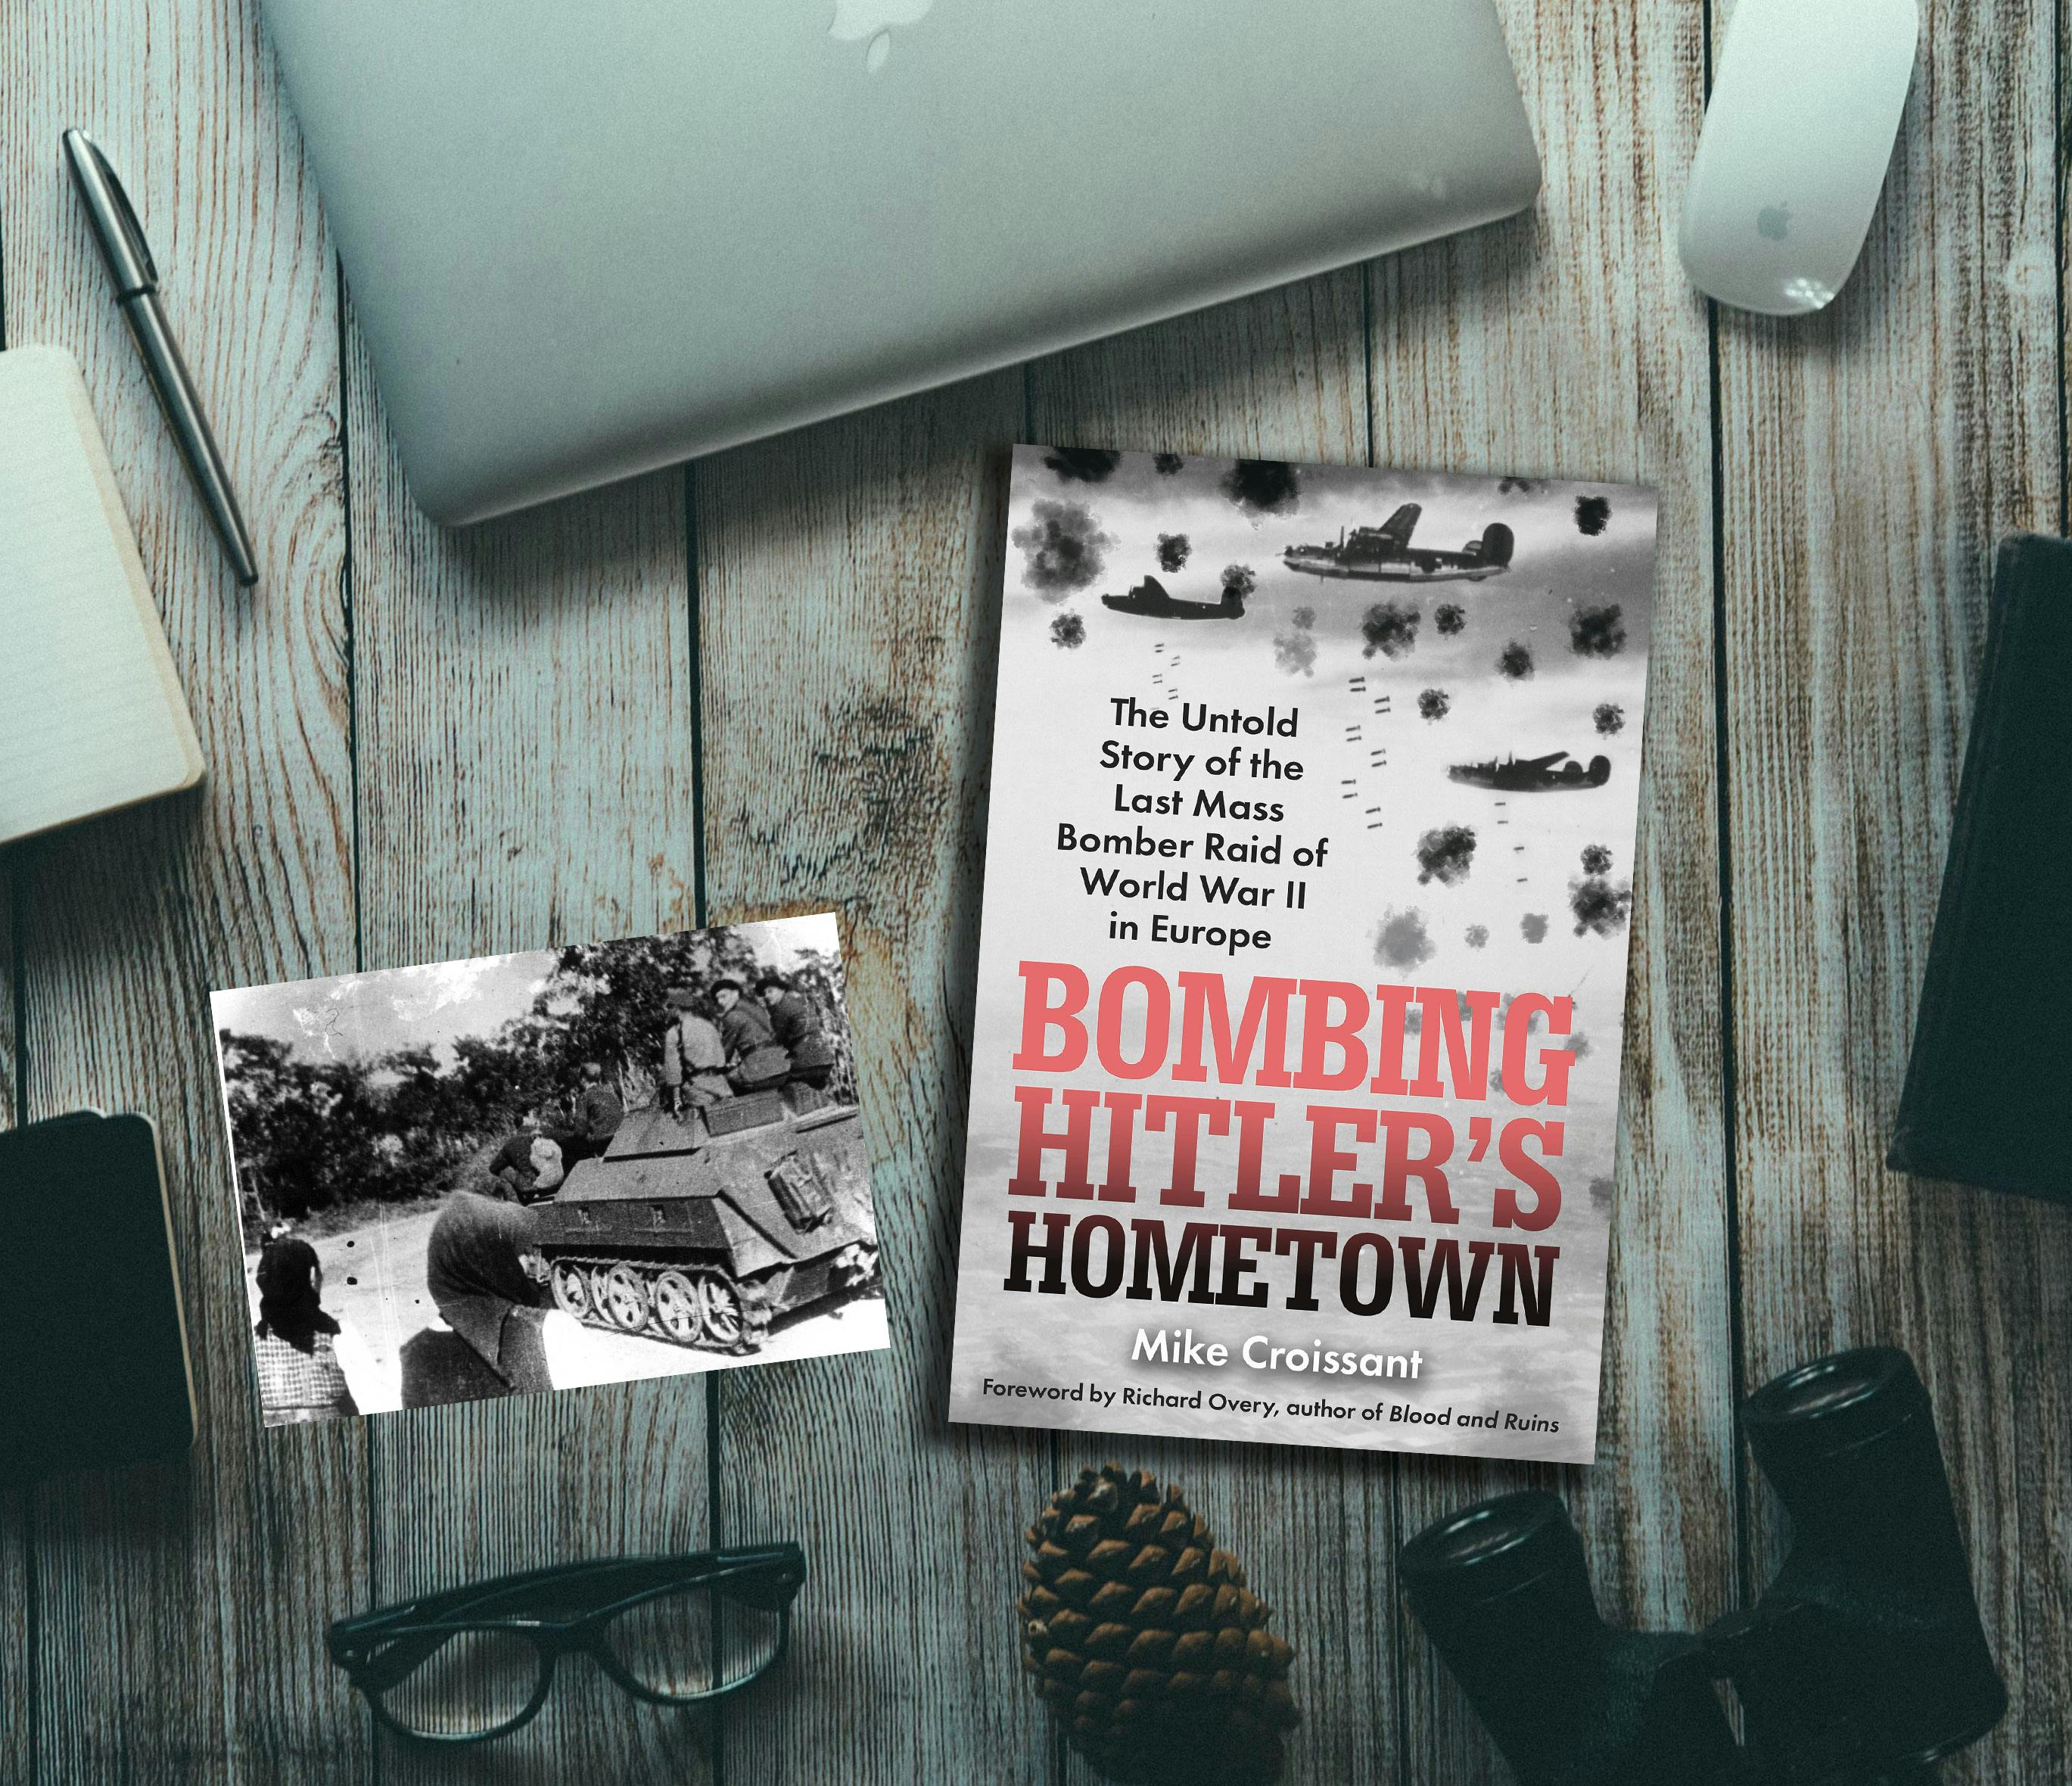 Episode 460: A 2 Episode Special! Interview w/ Mike Croissant about his book, Bombing Hitler's Hometown and then, Defying the Odds: The Soviets versus Romania